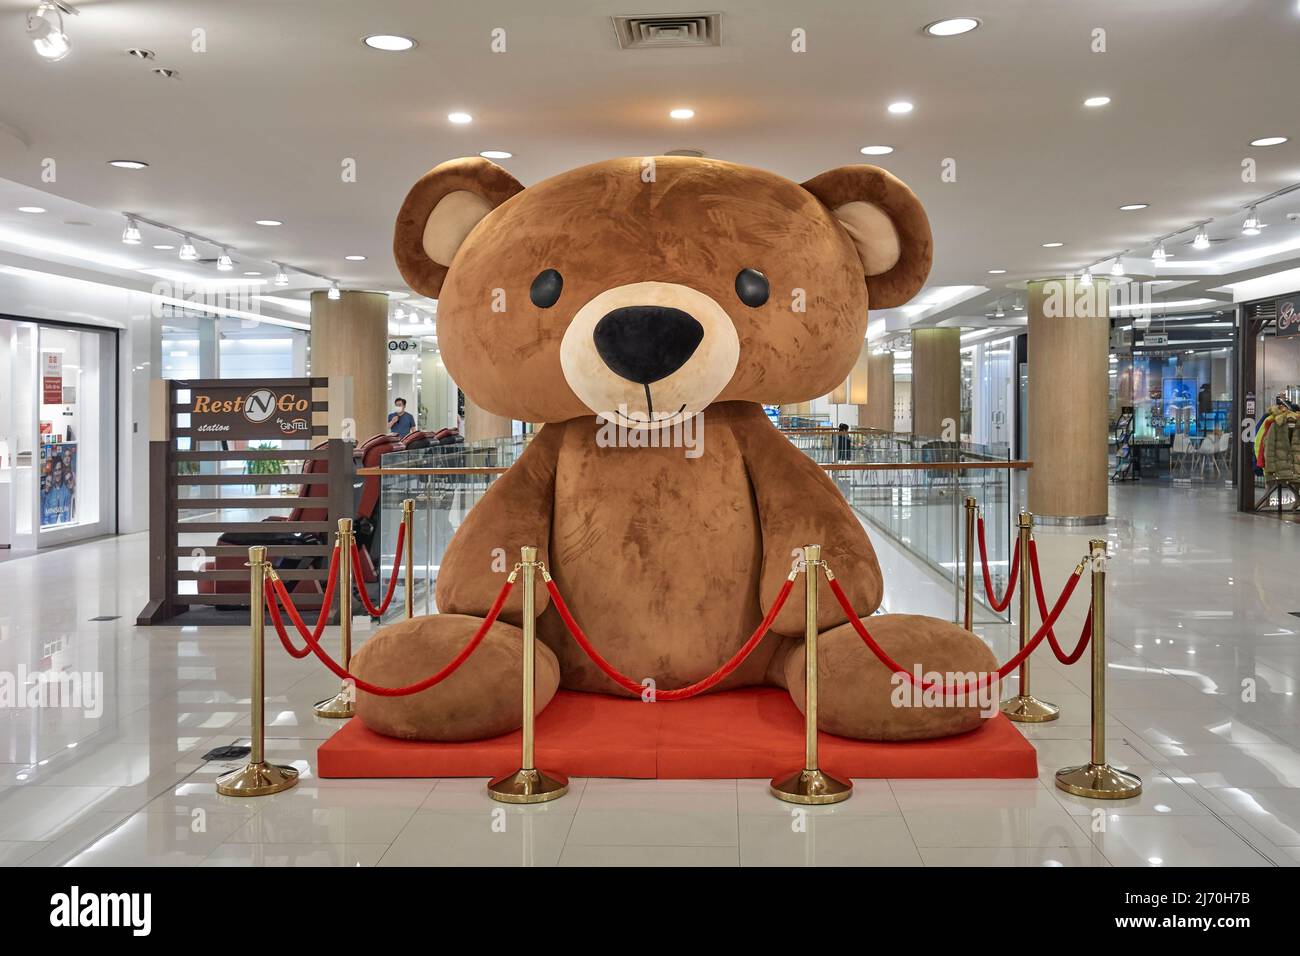 Large Teddy Bear feature in a shopping mall interior, Thailand Southeast Asia Stock Photo